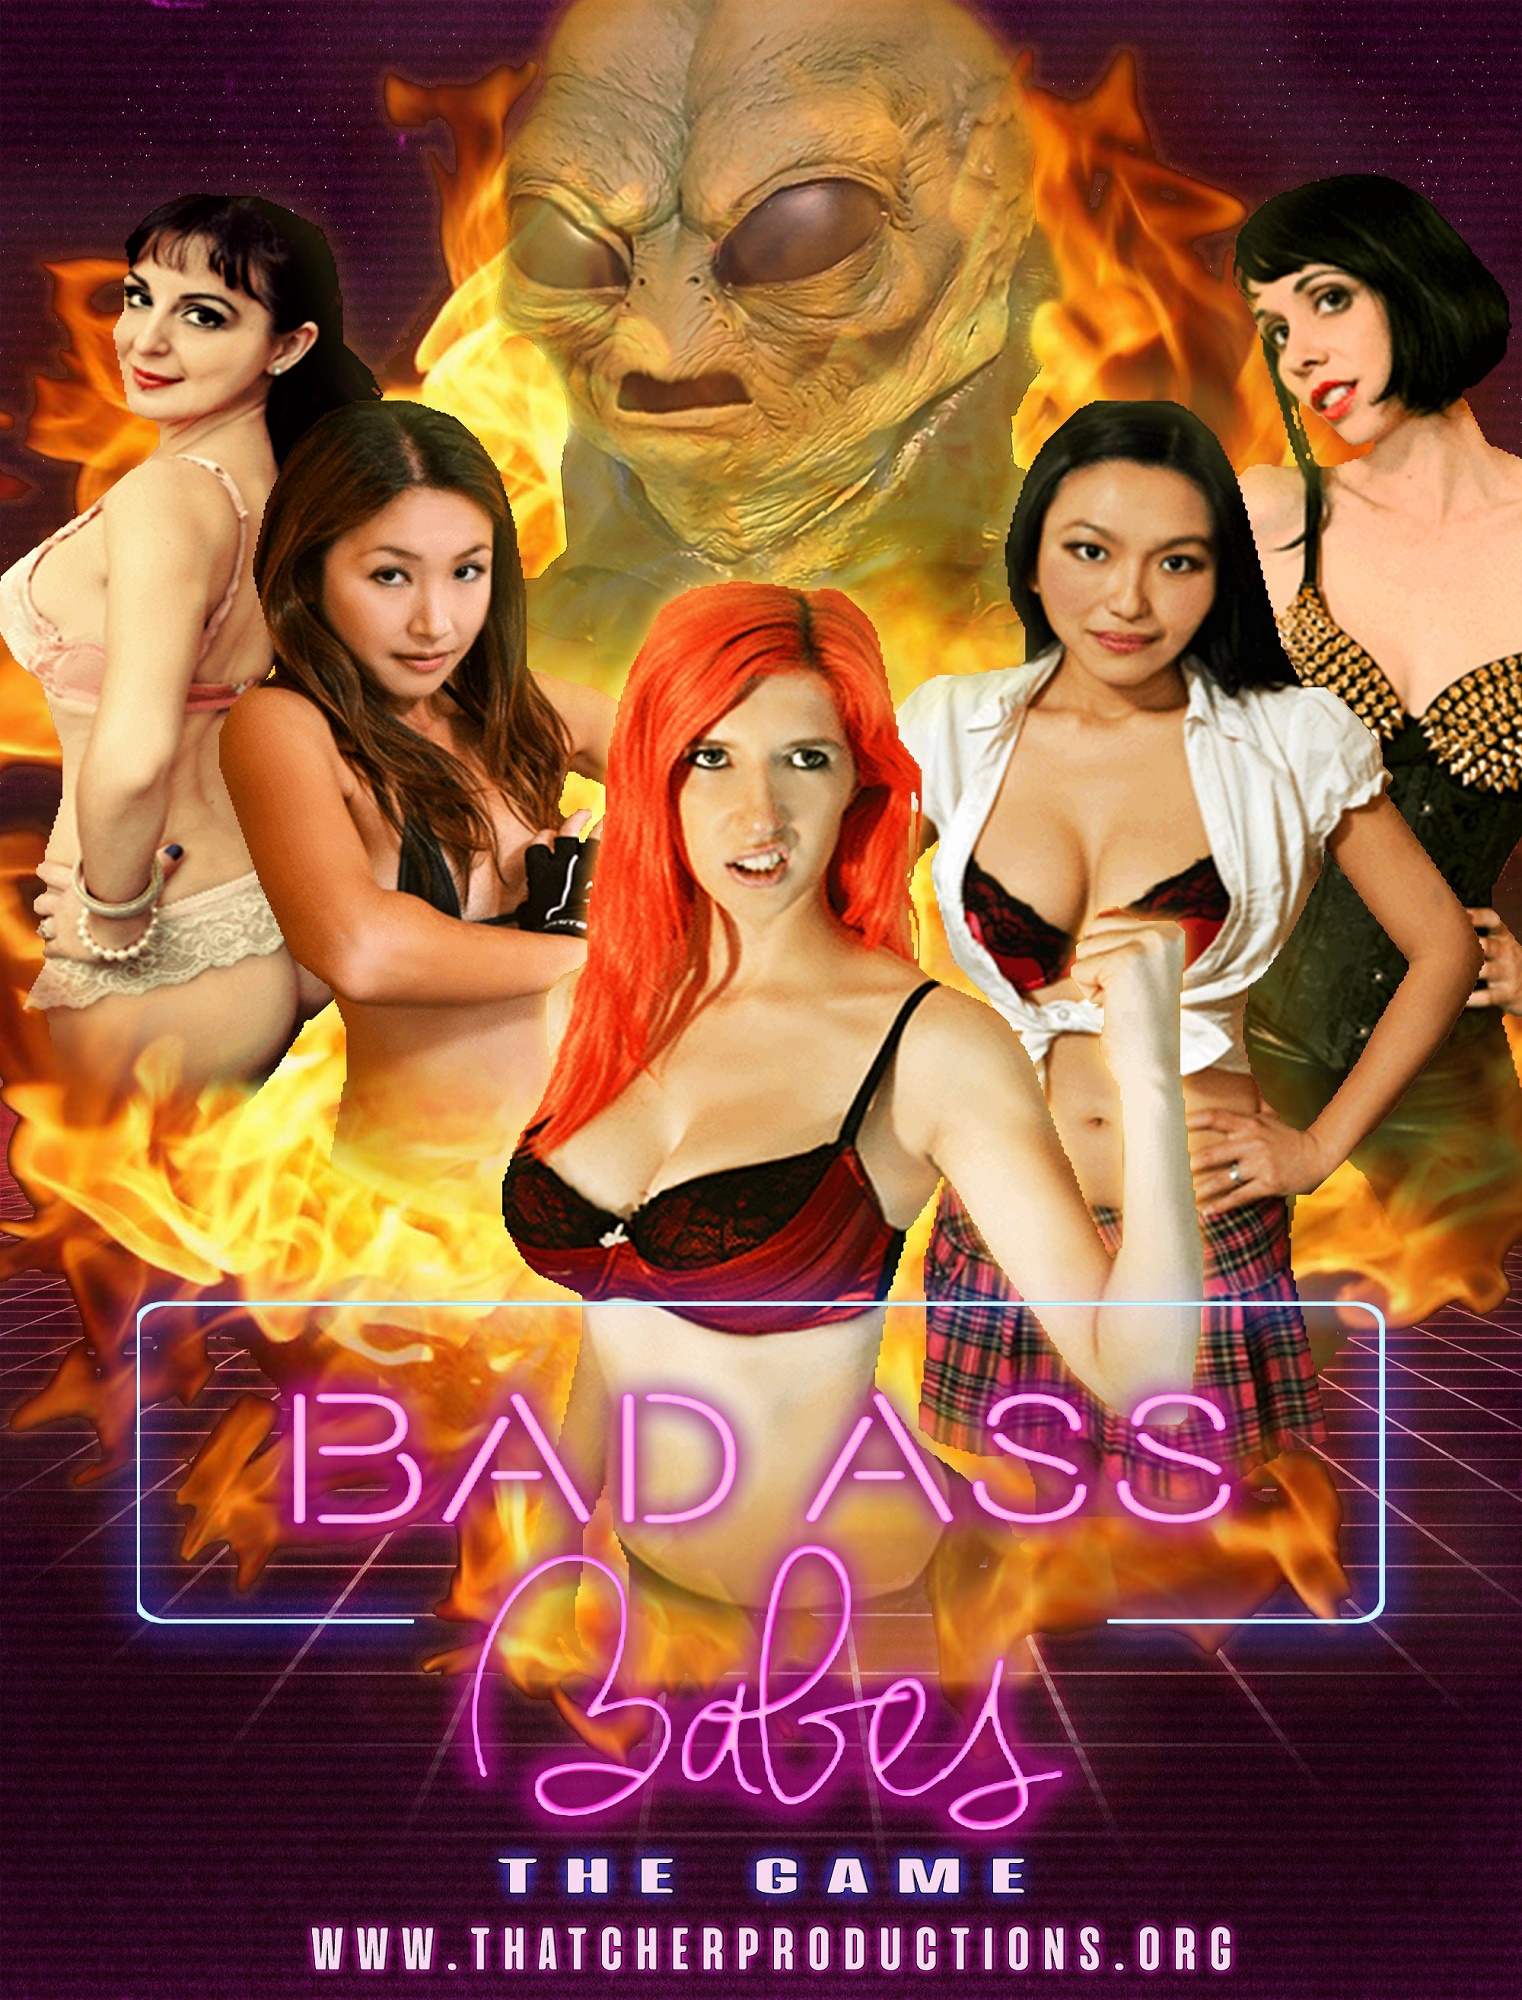 Bad ass babes Thatcher Productions